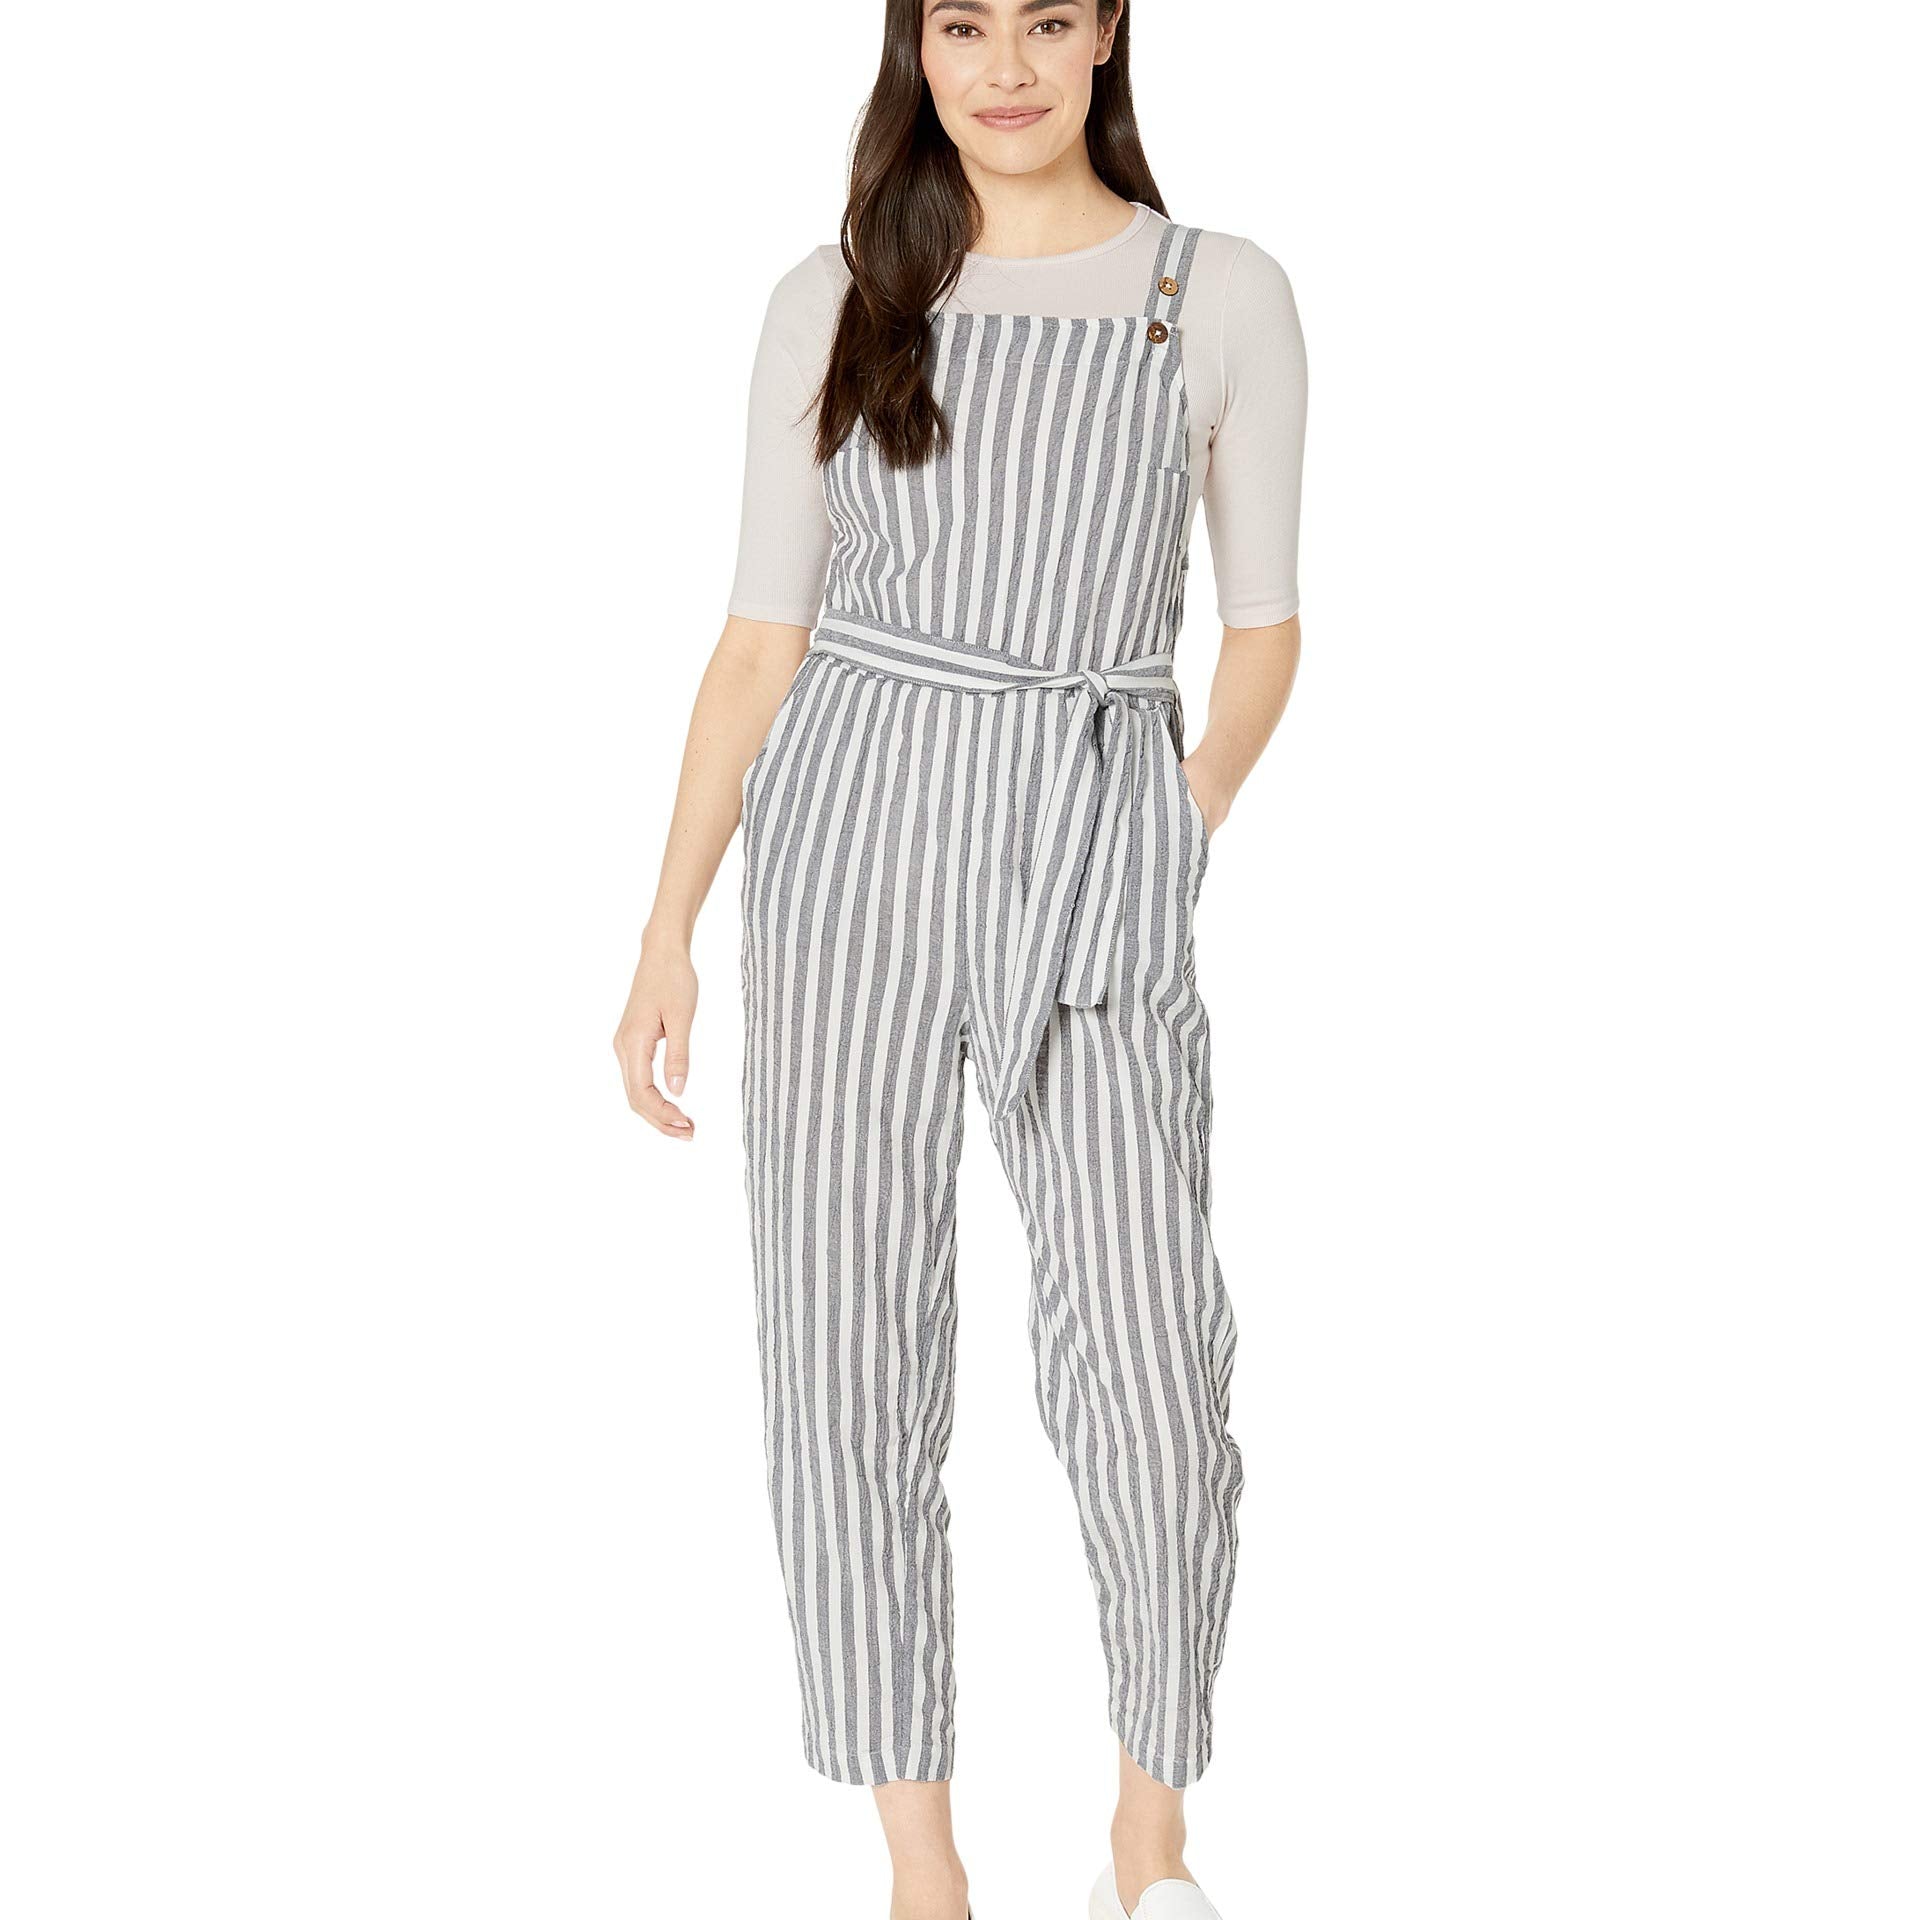 Roxy Another You Jumpsuit XWBW XS